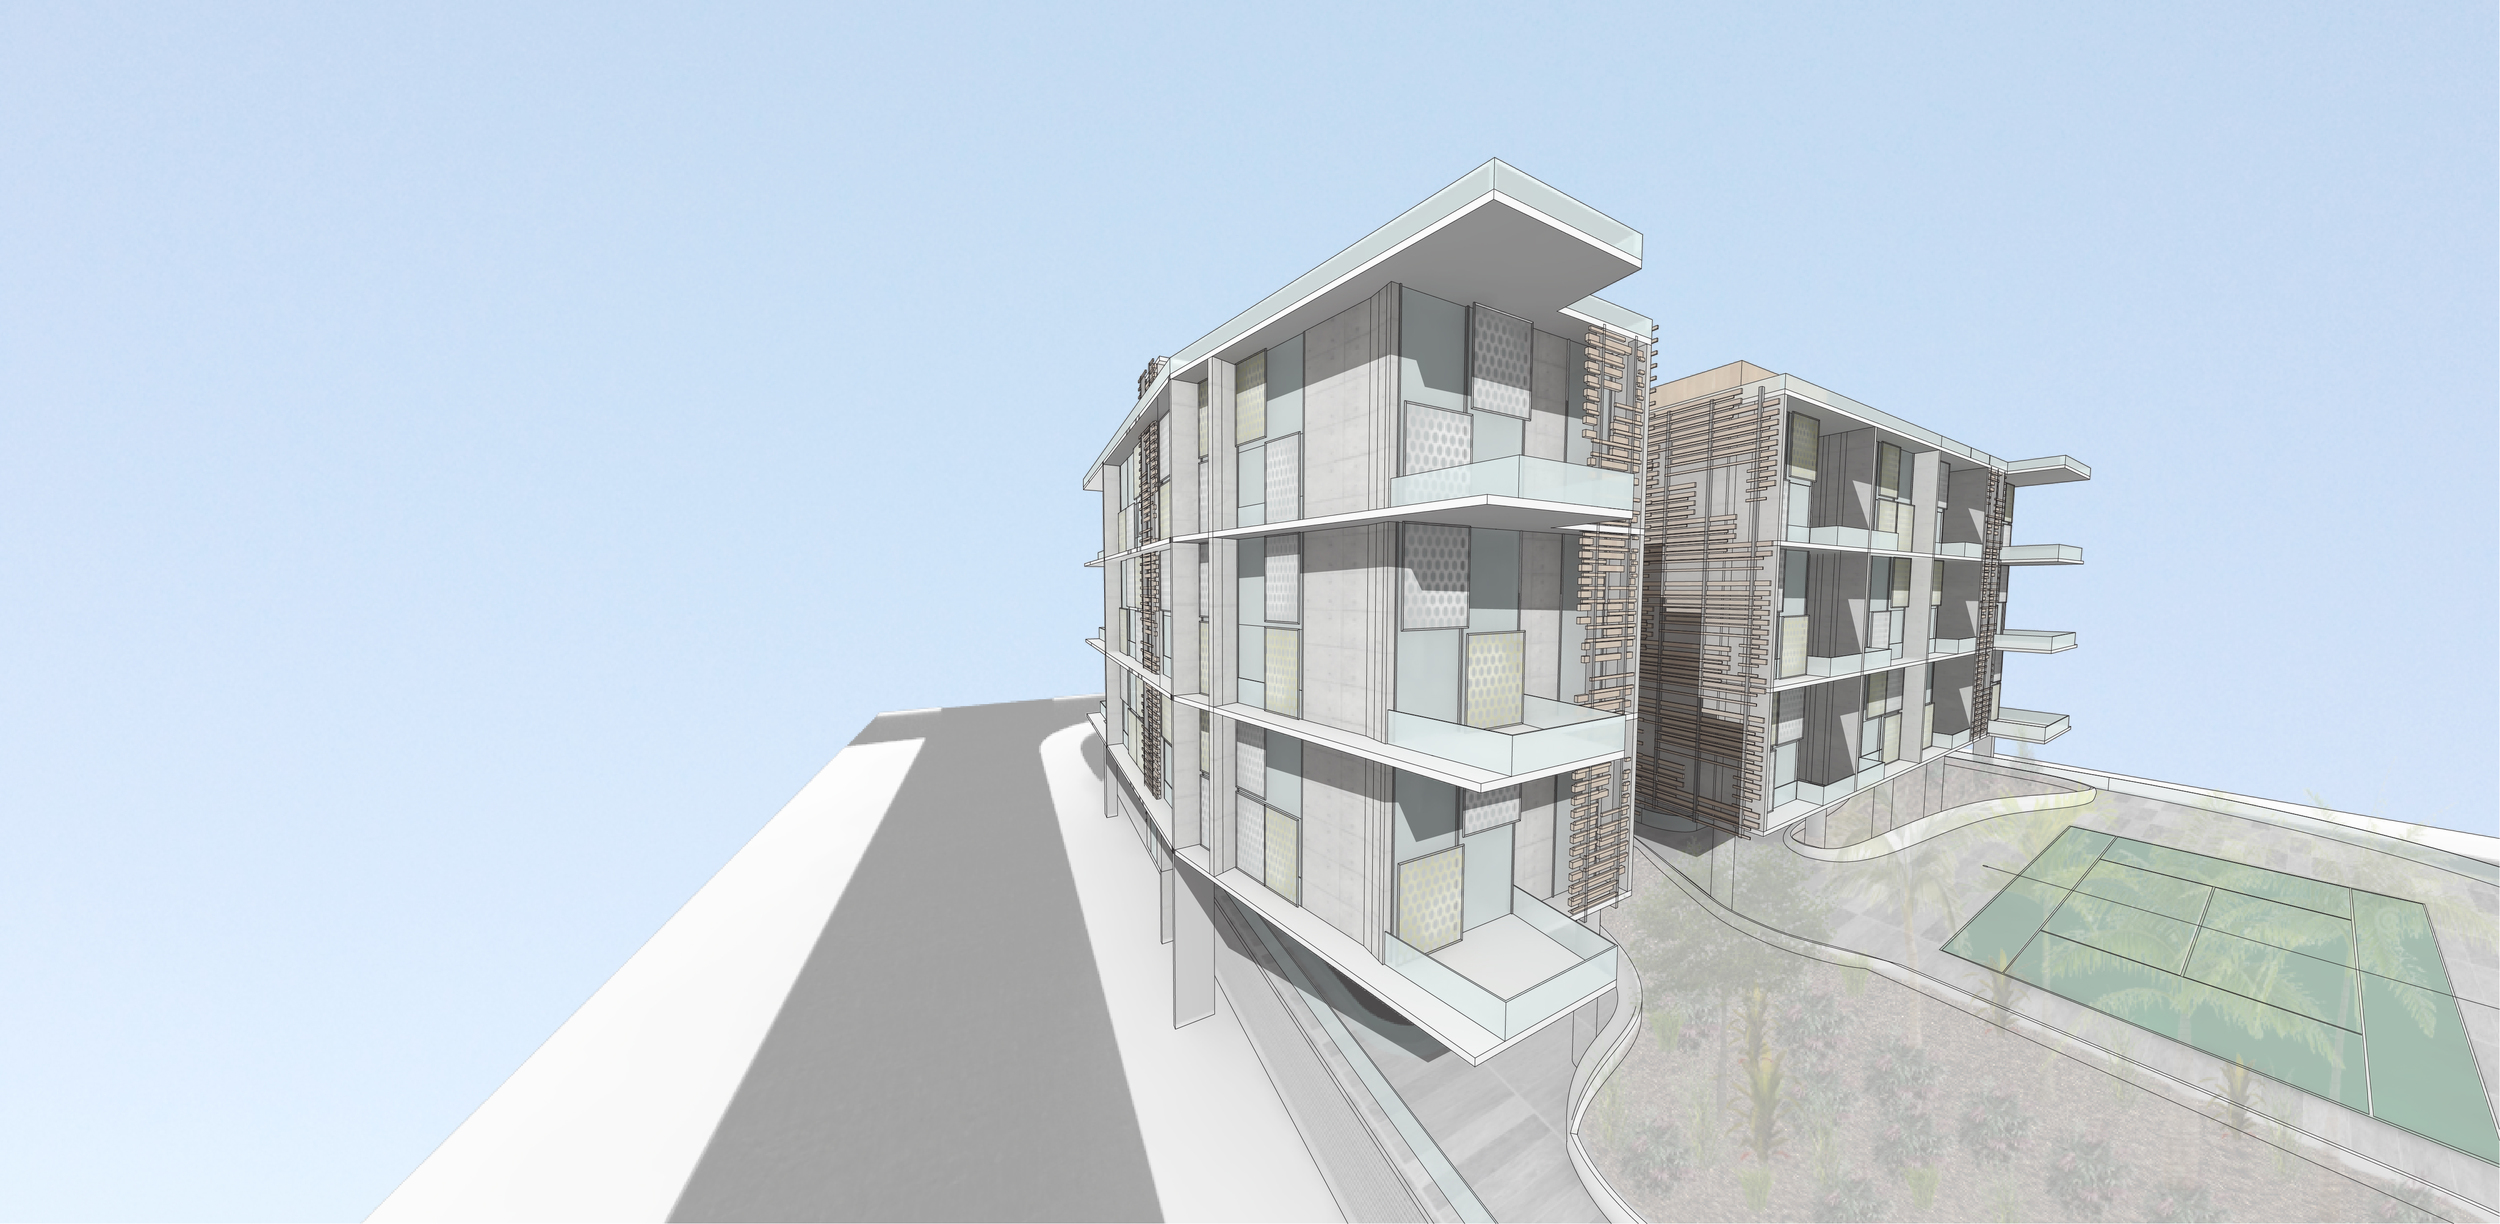   Located in the up and coming neighborhood of Wynwood in Mid town Miami, the proposed 3 story apartment building responds to the growth in population of the area. The apartments in the building are double height two level open loft configurations fi